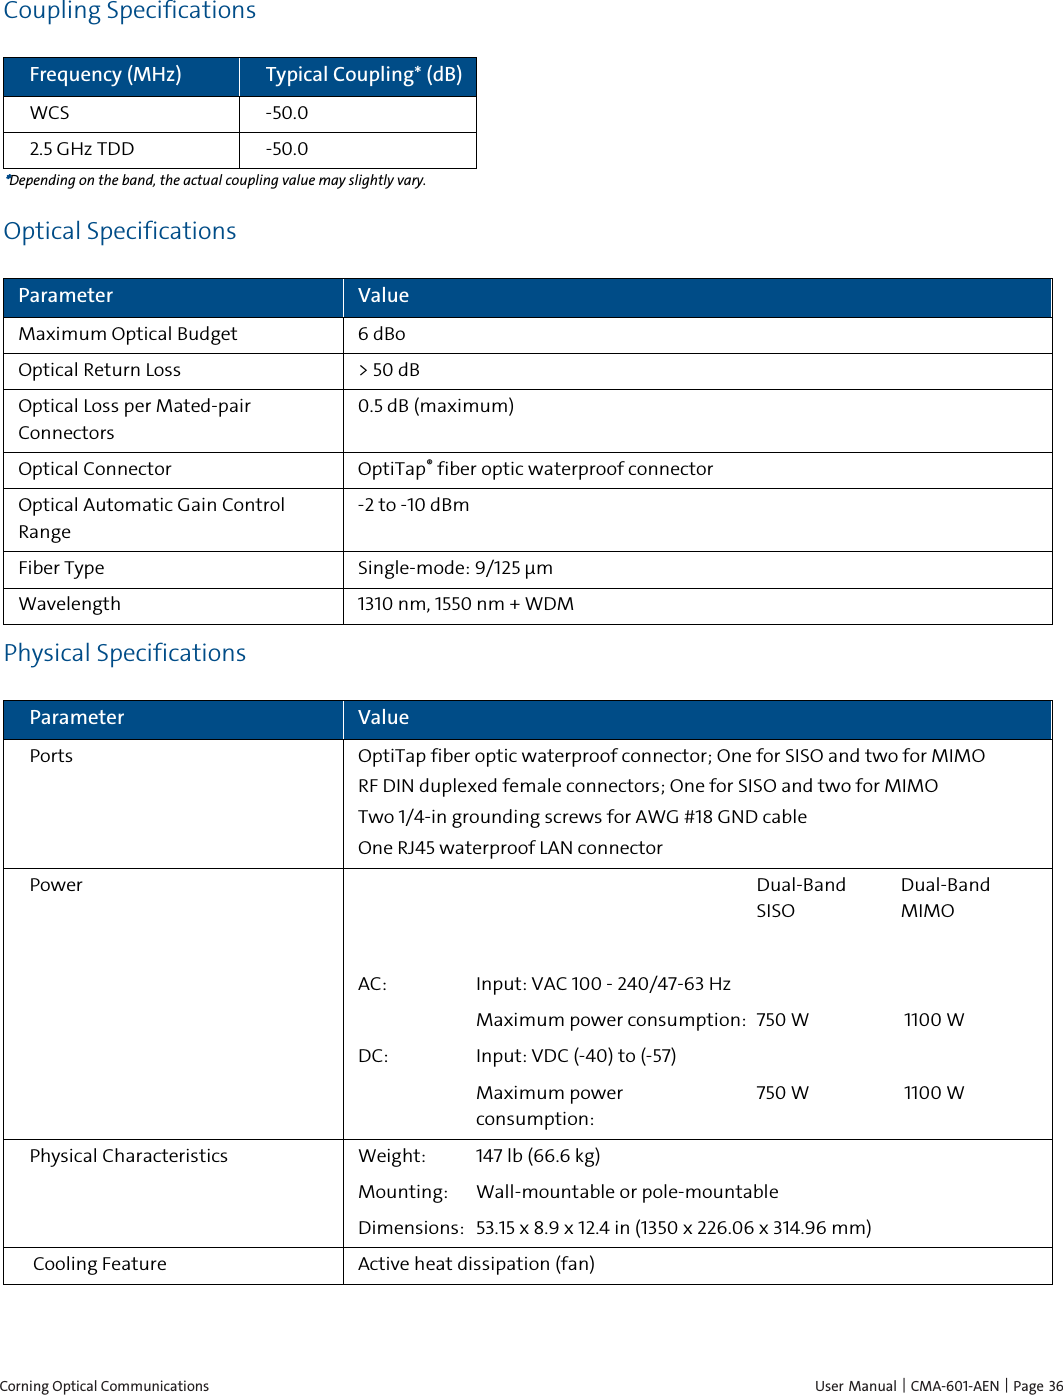  Corning Optical Communications    User Manual |  CMA-601-AEN | Page  36 Coupling Specifications Frequency (MHz) Typical Coupling* (dB) WCS  -50.0 2.5 GHz TDD  -50.0 *Depending on the band, the actual coupling value may slightly vary. Optical Specifications Parameter Value Maximum Optical Budget 6 dBo Optical Return Loss &gt; 50 dB Optical Loss per Mated-pair Connectors 0.5 dB (maximum) Optical Connector OptiTap® fiber optic waterproof connector Optical Automatic Gain Control Range -2 to -10 dBm Fiber Type  Single-mode: 9/125 μm Wavelength 1310 nm, 1550 nm + WDM Physical Specifications Parameter Value Ports OptiTap fiber optic waterproof connector; One for SISO and two for MIMO RF DIN duplexed female connectors; One for SISO and two for MIMO Two 1/4-in grounding screws for AWG #18 GND cable  One RJ45 waterproof LAN connector Power      Dual-Band SISO Dual-Band MIMO      AC: Input: VAC 100 - 240/47-63 Hz   Maximum power consumption: 750 W 1100 W DC: Input: VDC (-40) to (-57)   Maximum power consumption: 750 W  1100 W Physical Characteristics Weight: 147 lb (66.6 kg) Mounting: Wall-mountable or pole-mountable Dimensions: 53.15 x 8.9 x 12.4 in (1350 x 226.06 x 314.96 mm) Cooling Feature Active heat dissipation (fan)  